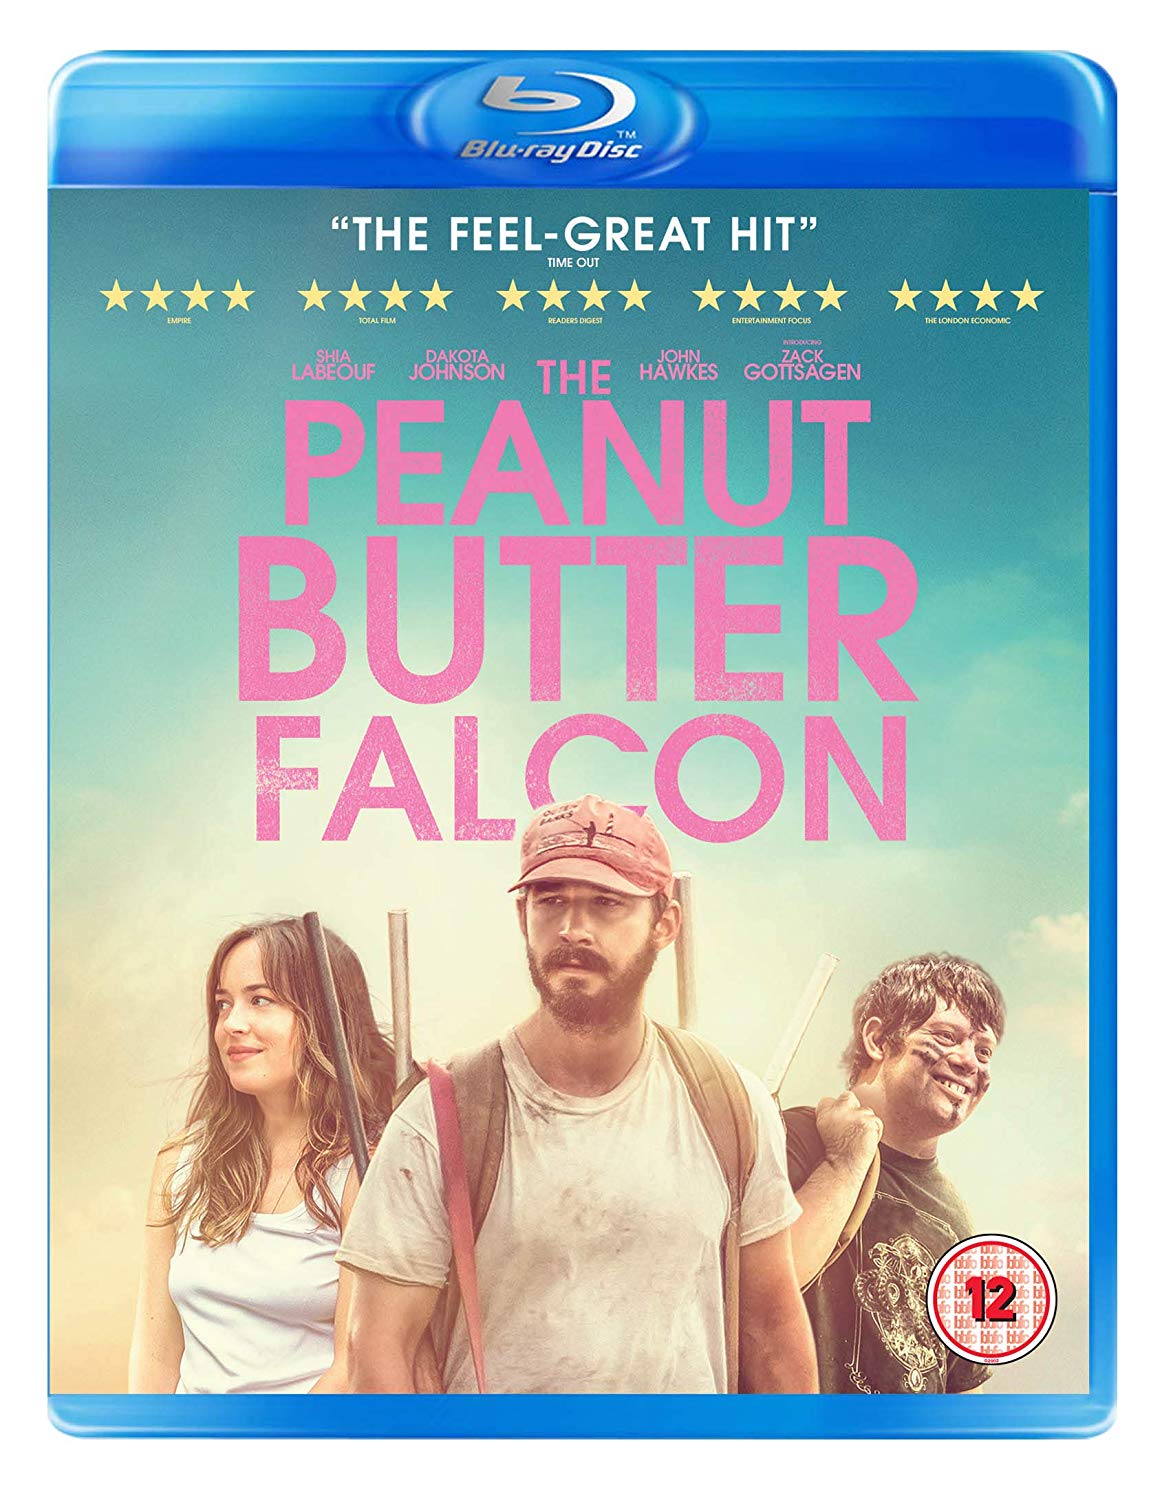 boom competitions - win The Peanut Butter Falcon on Blu-ray